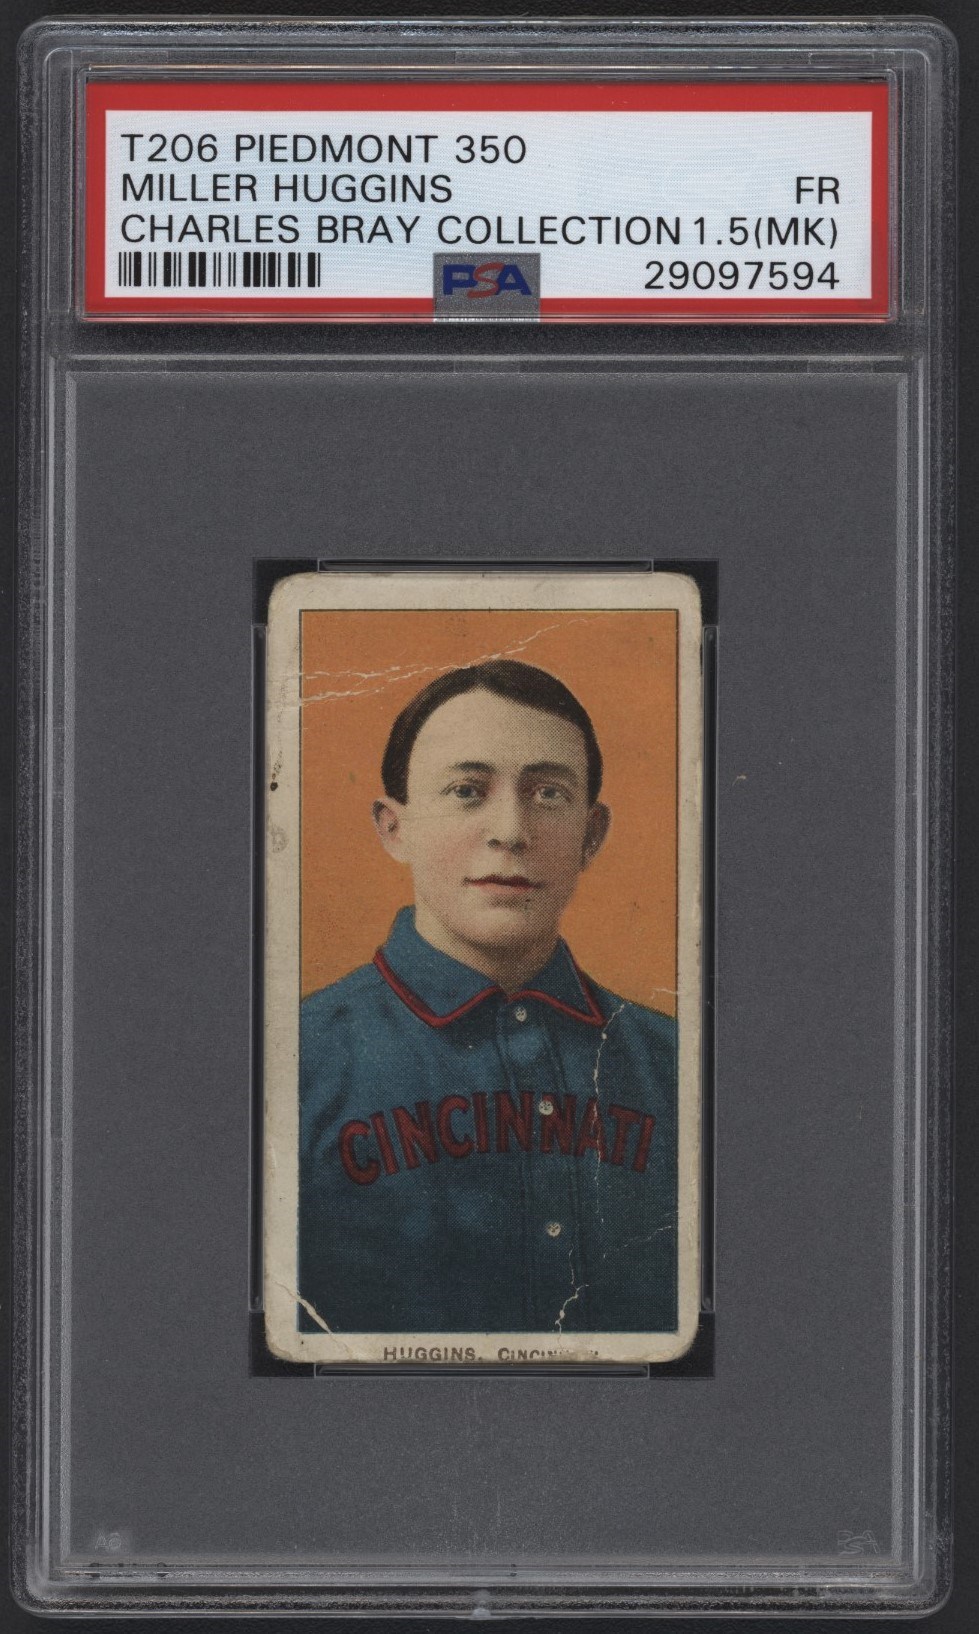 - T206 Piedmont 350 Miller Huggins PSA 1.5 From the Charles Bray Collection